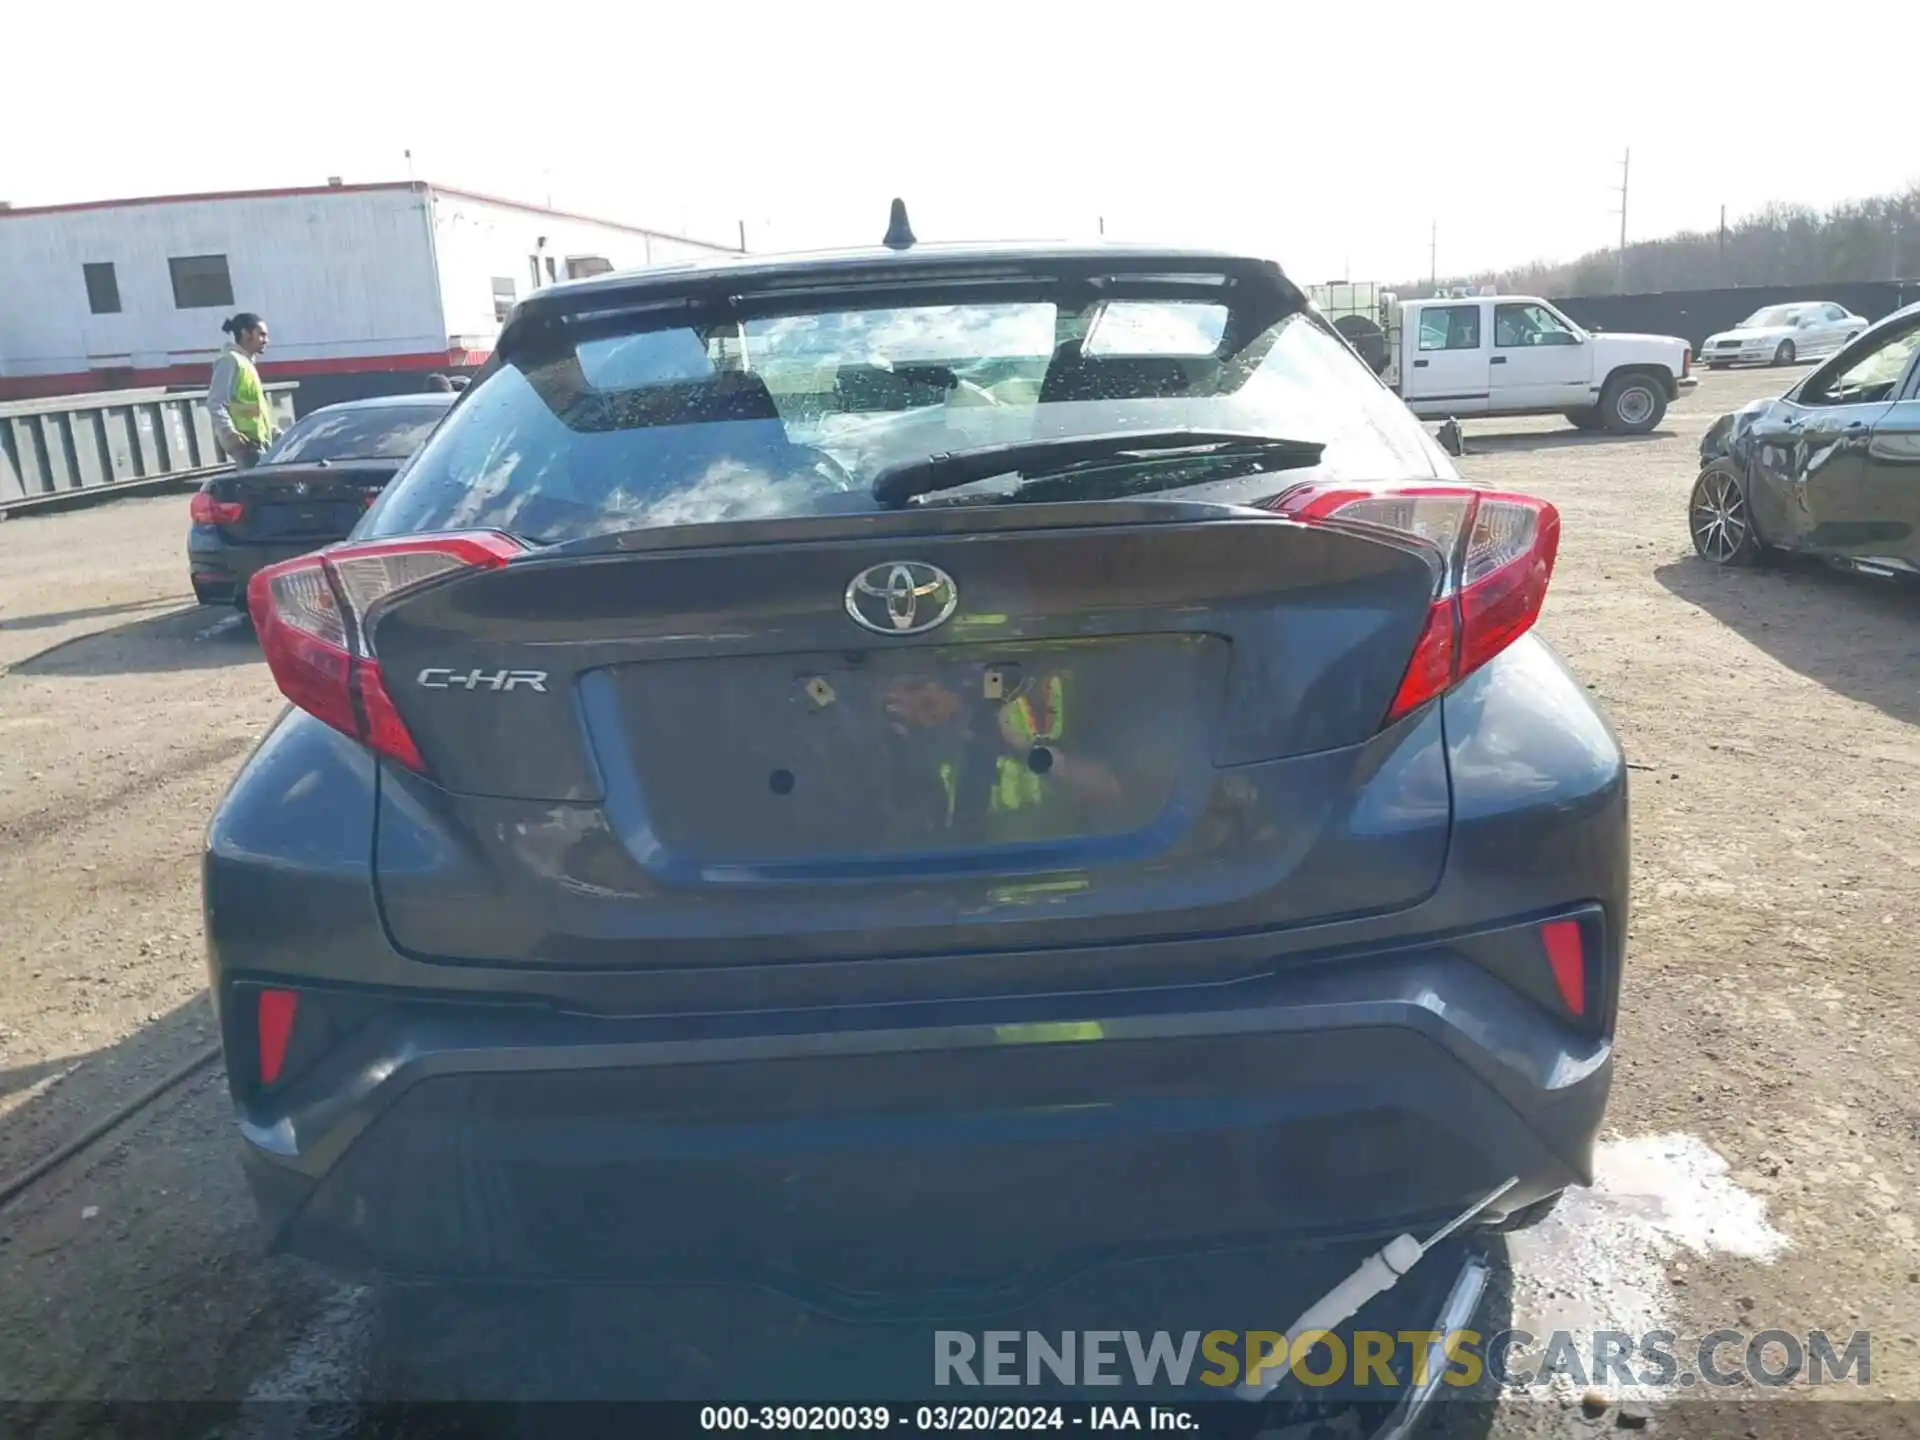 17 Photograph of a damaged car NMTKHMBXXNR145634 TOYOTA C-HR 2022